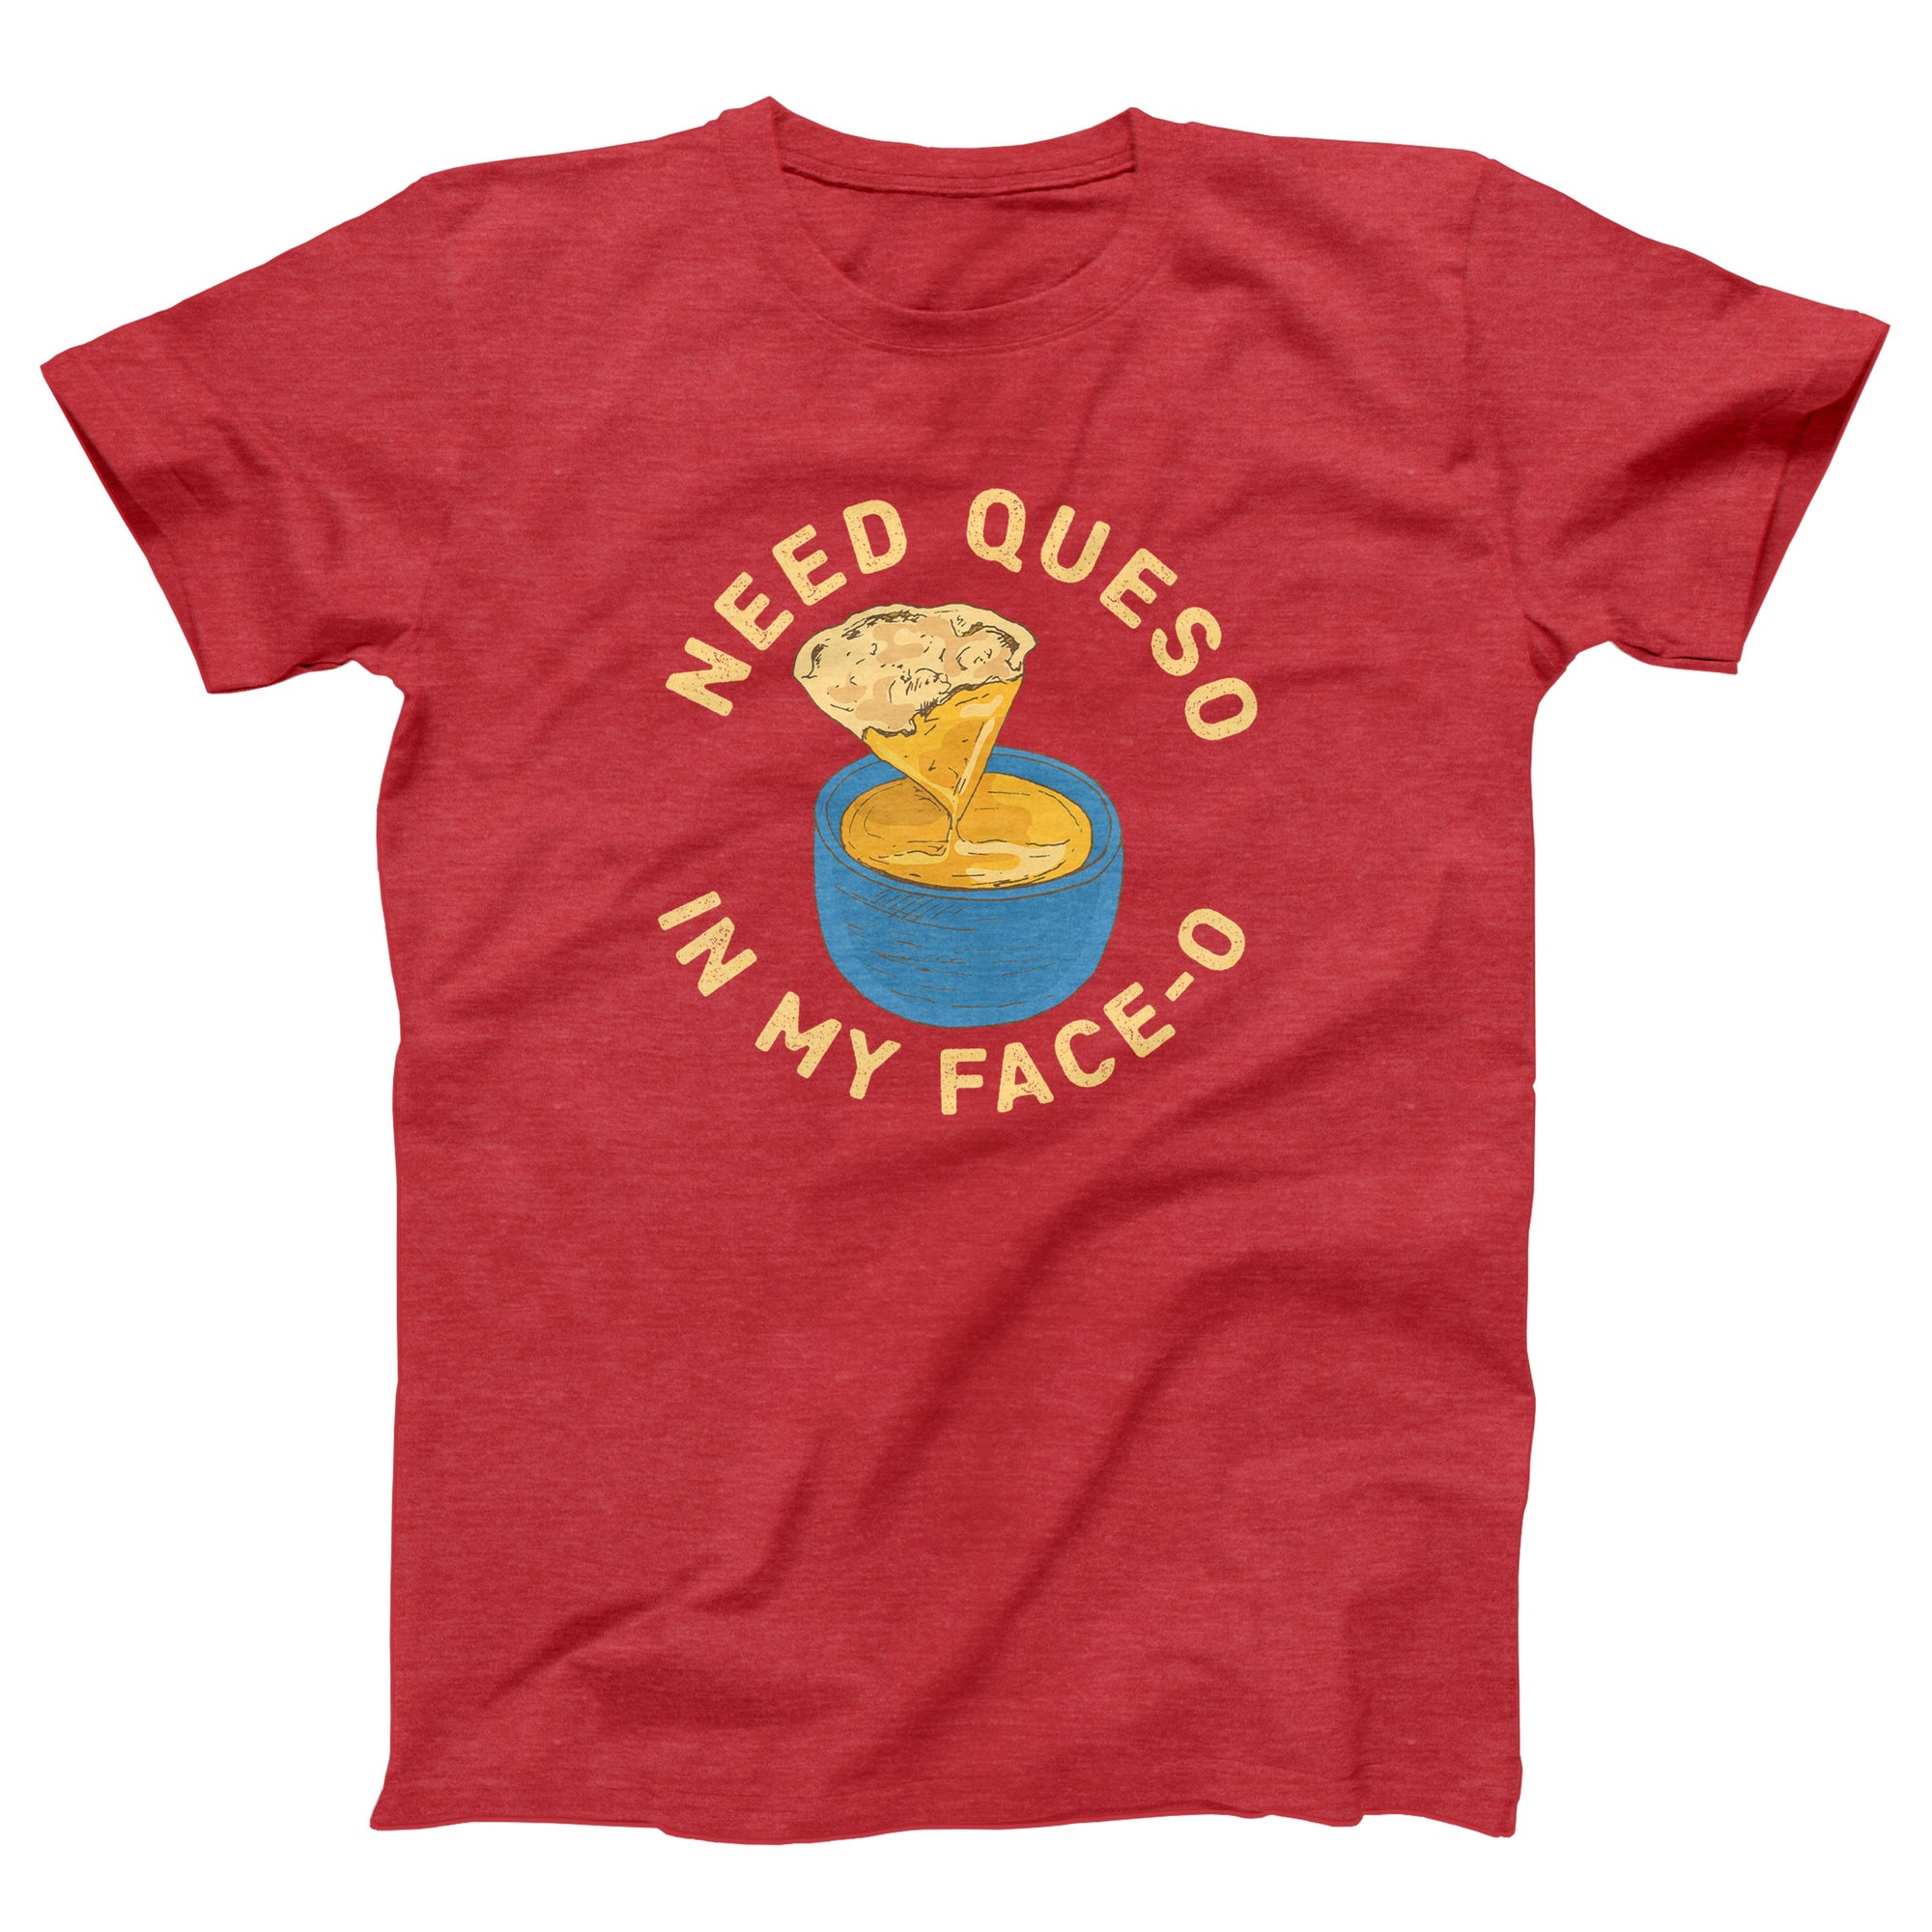 Need Queso In My Face-O Adult Unisex T-Shirt - anishphilip